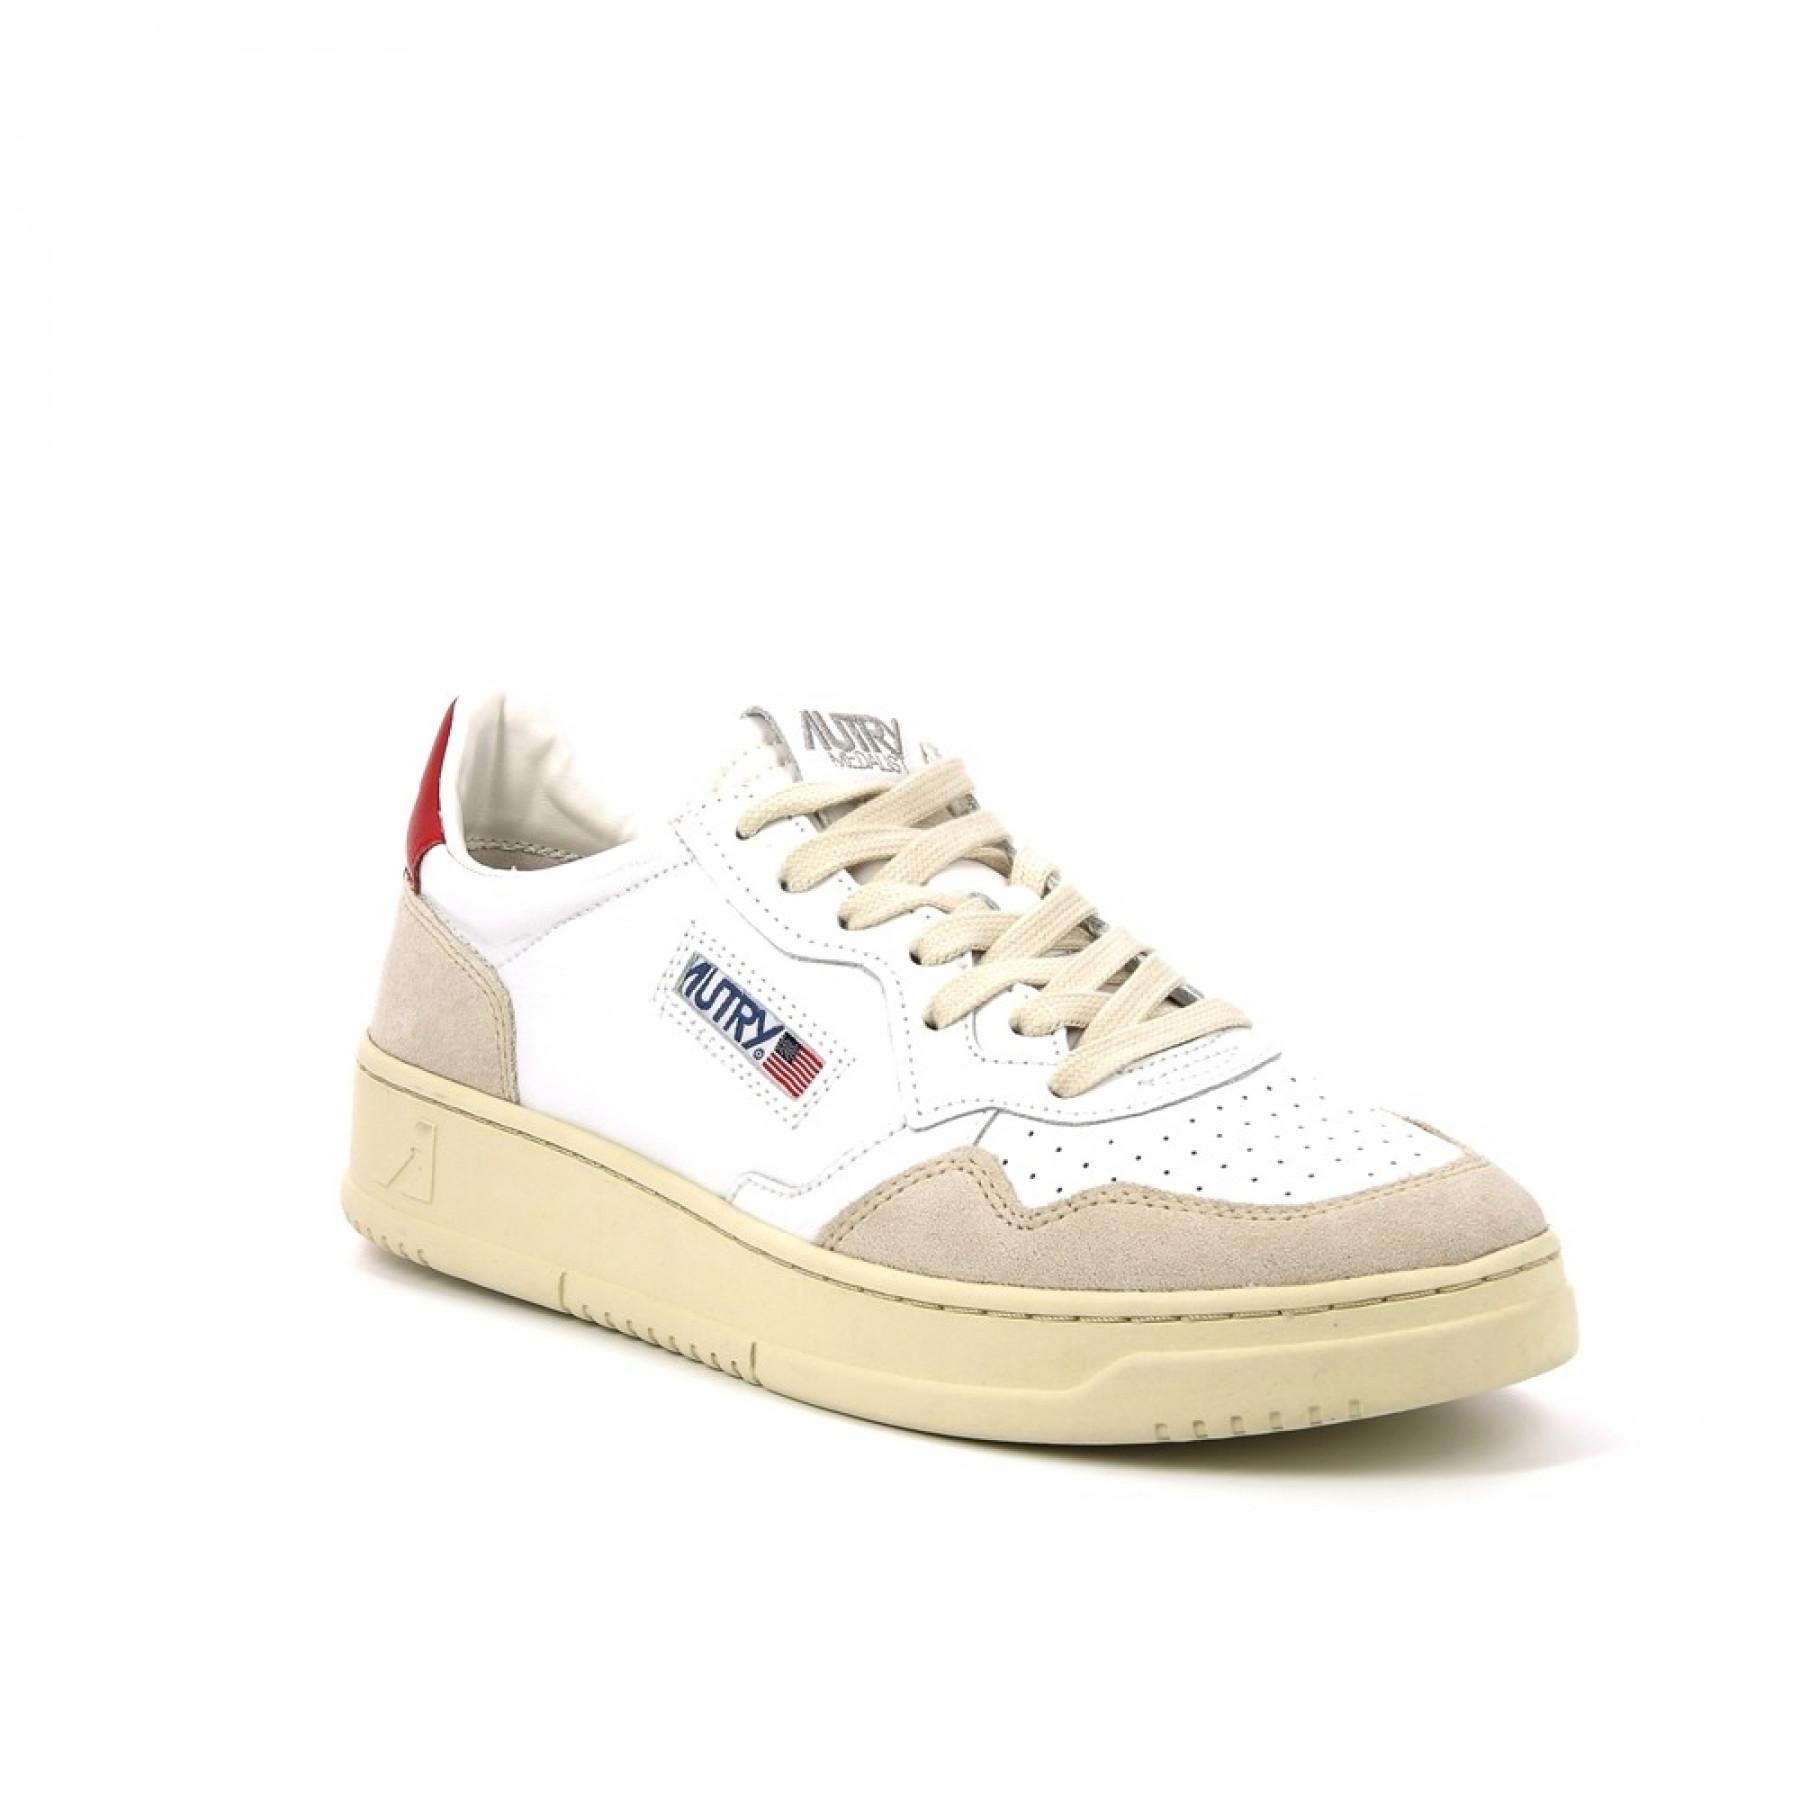 Formadores Autry Medalist LS24 Leather/Suede White Red